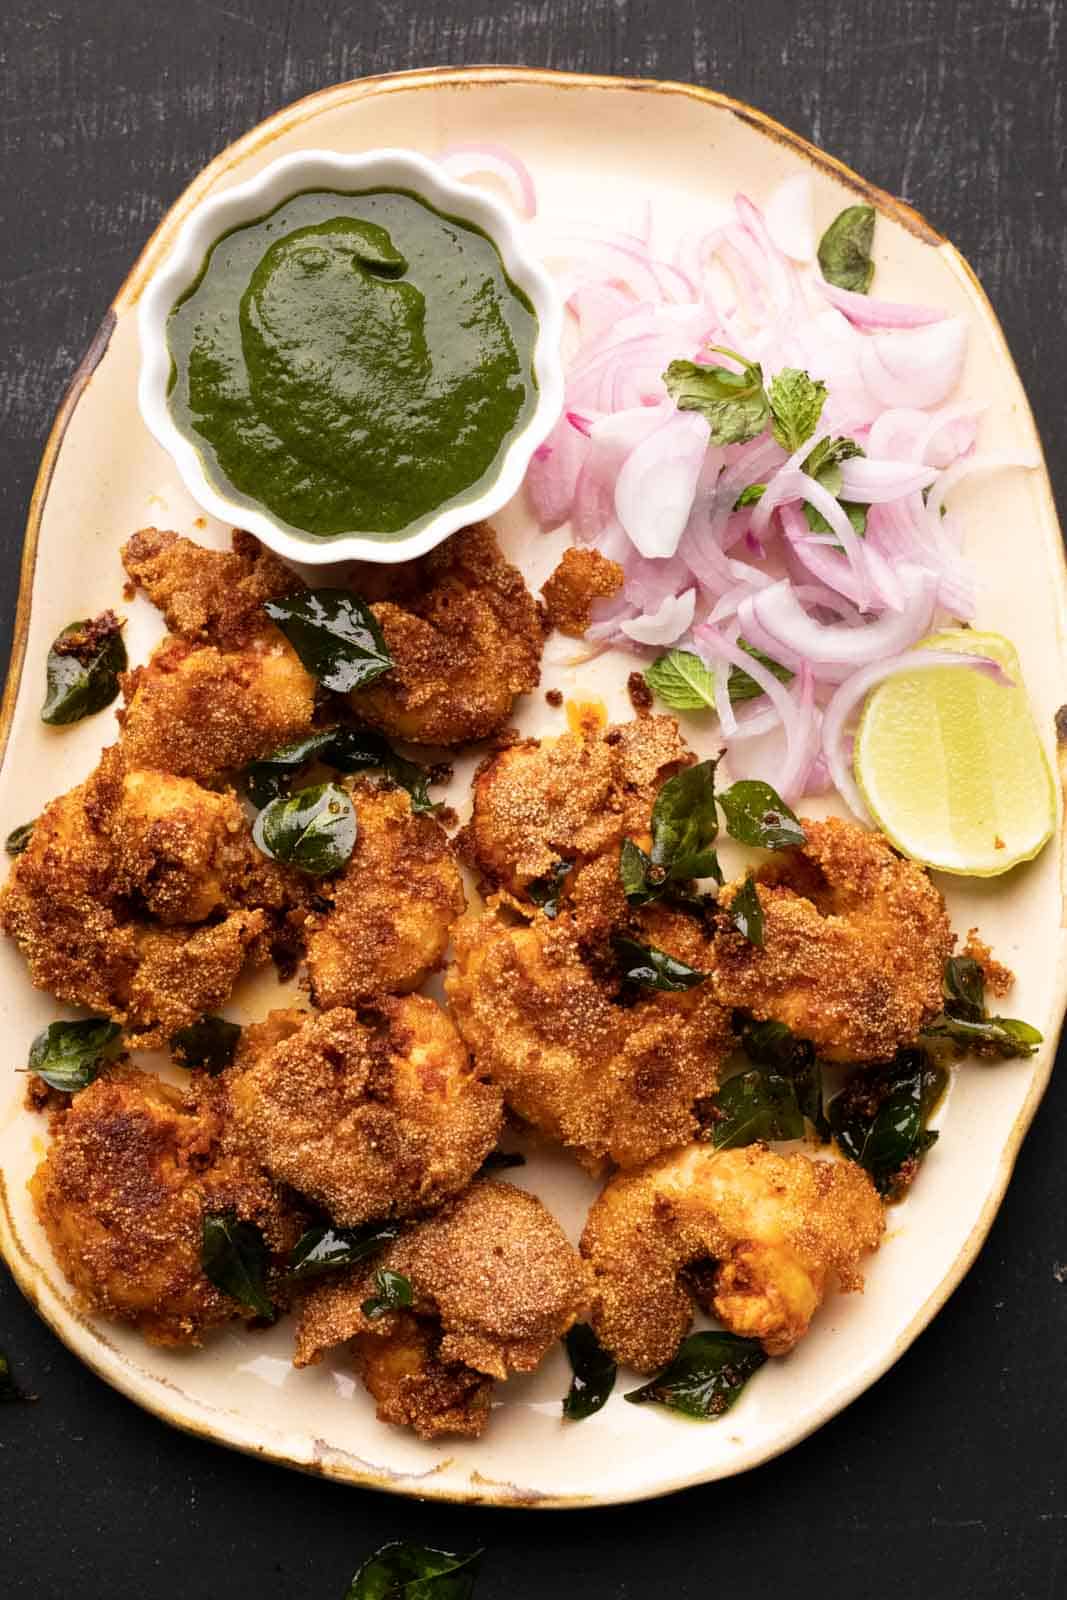 Prawn Rava Fry served on a beige platter with chutney and sliced onions on the side